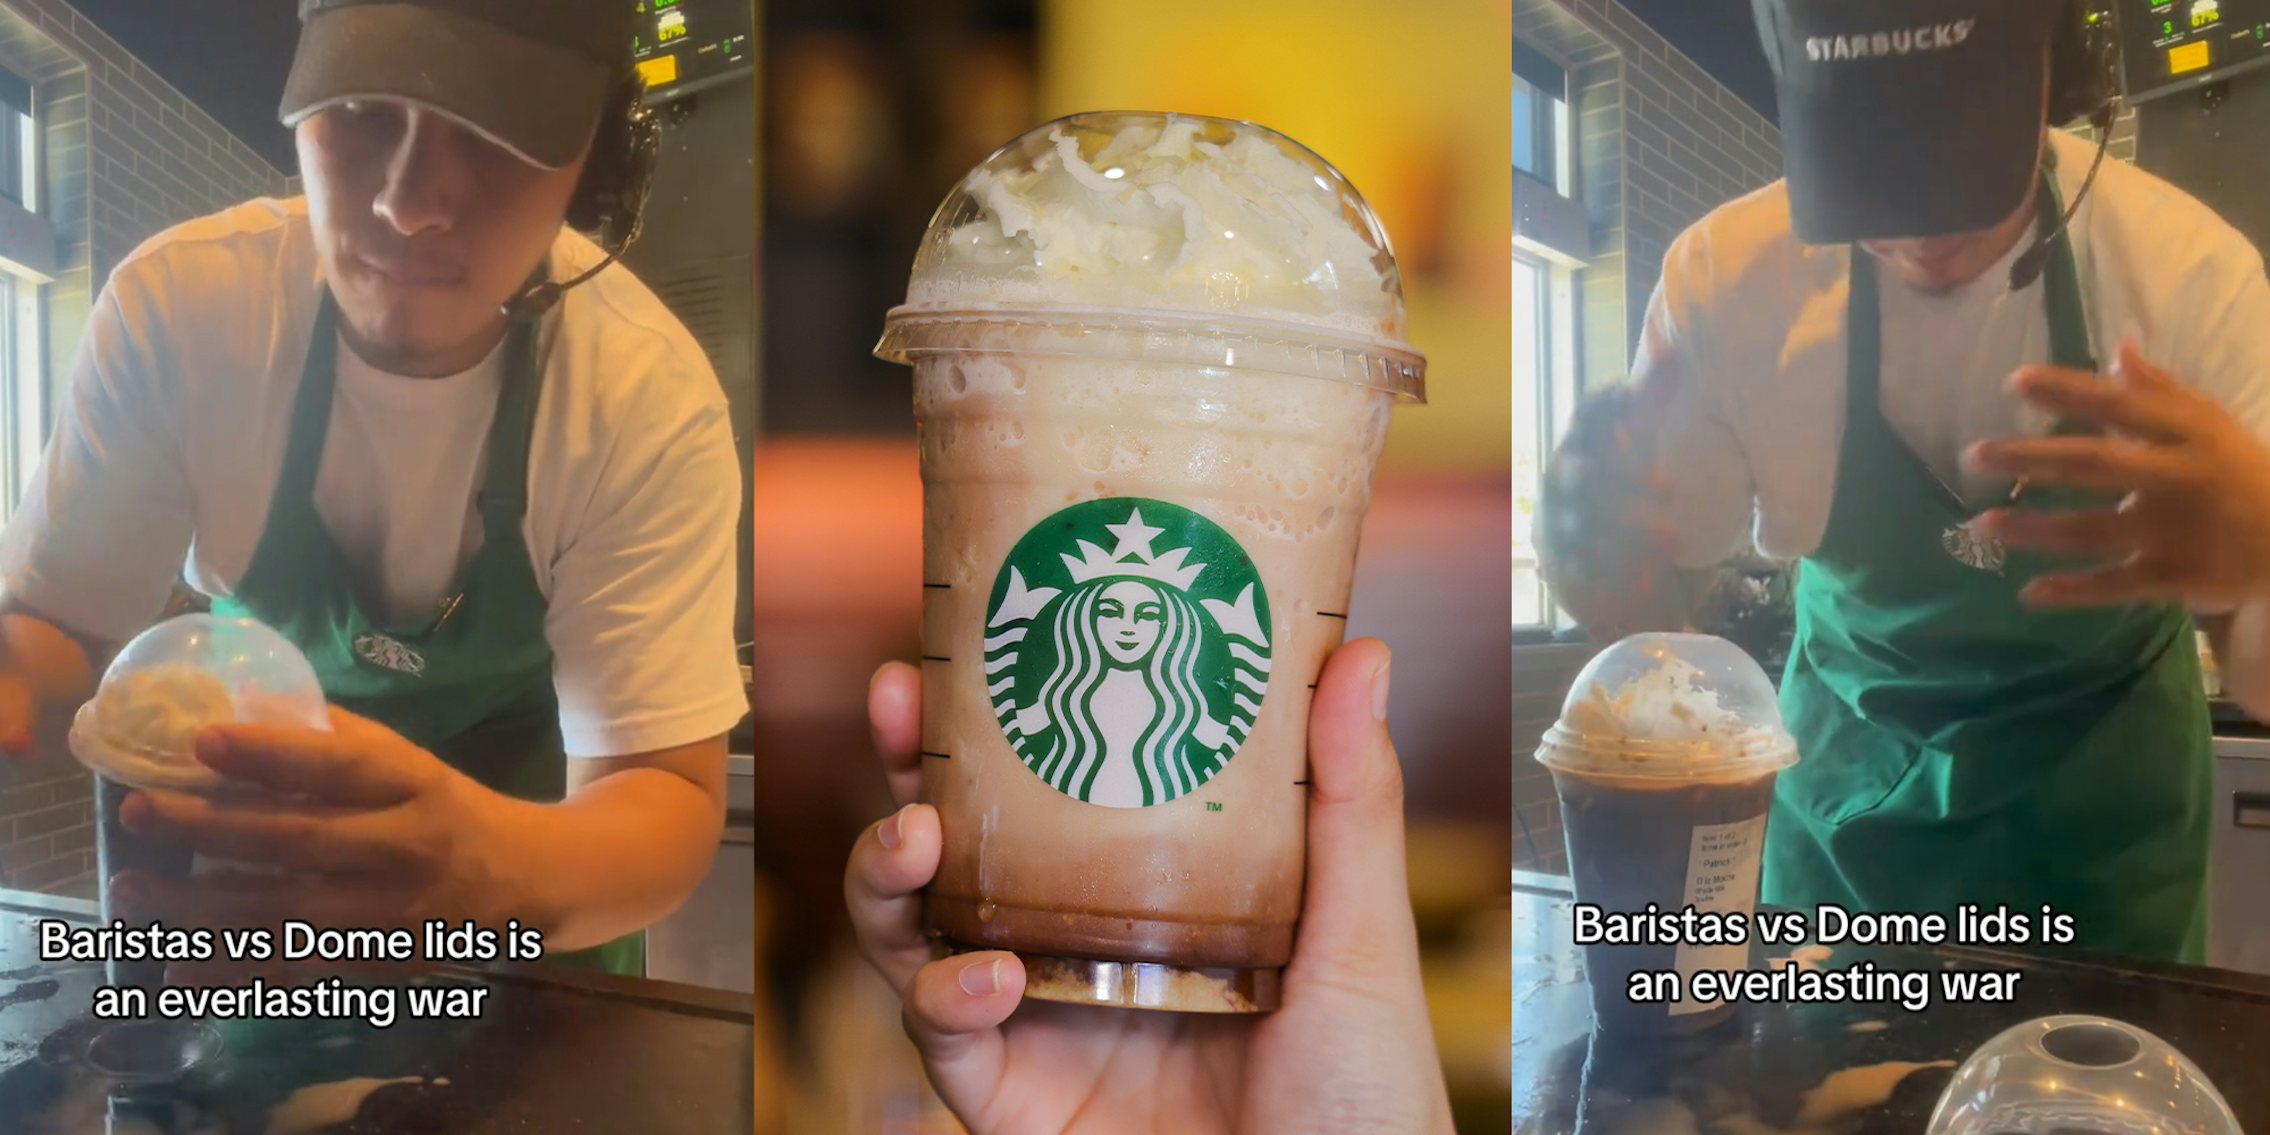 Starbucks barista shows what it's like when a customer's drink requires a dome lid